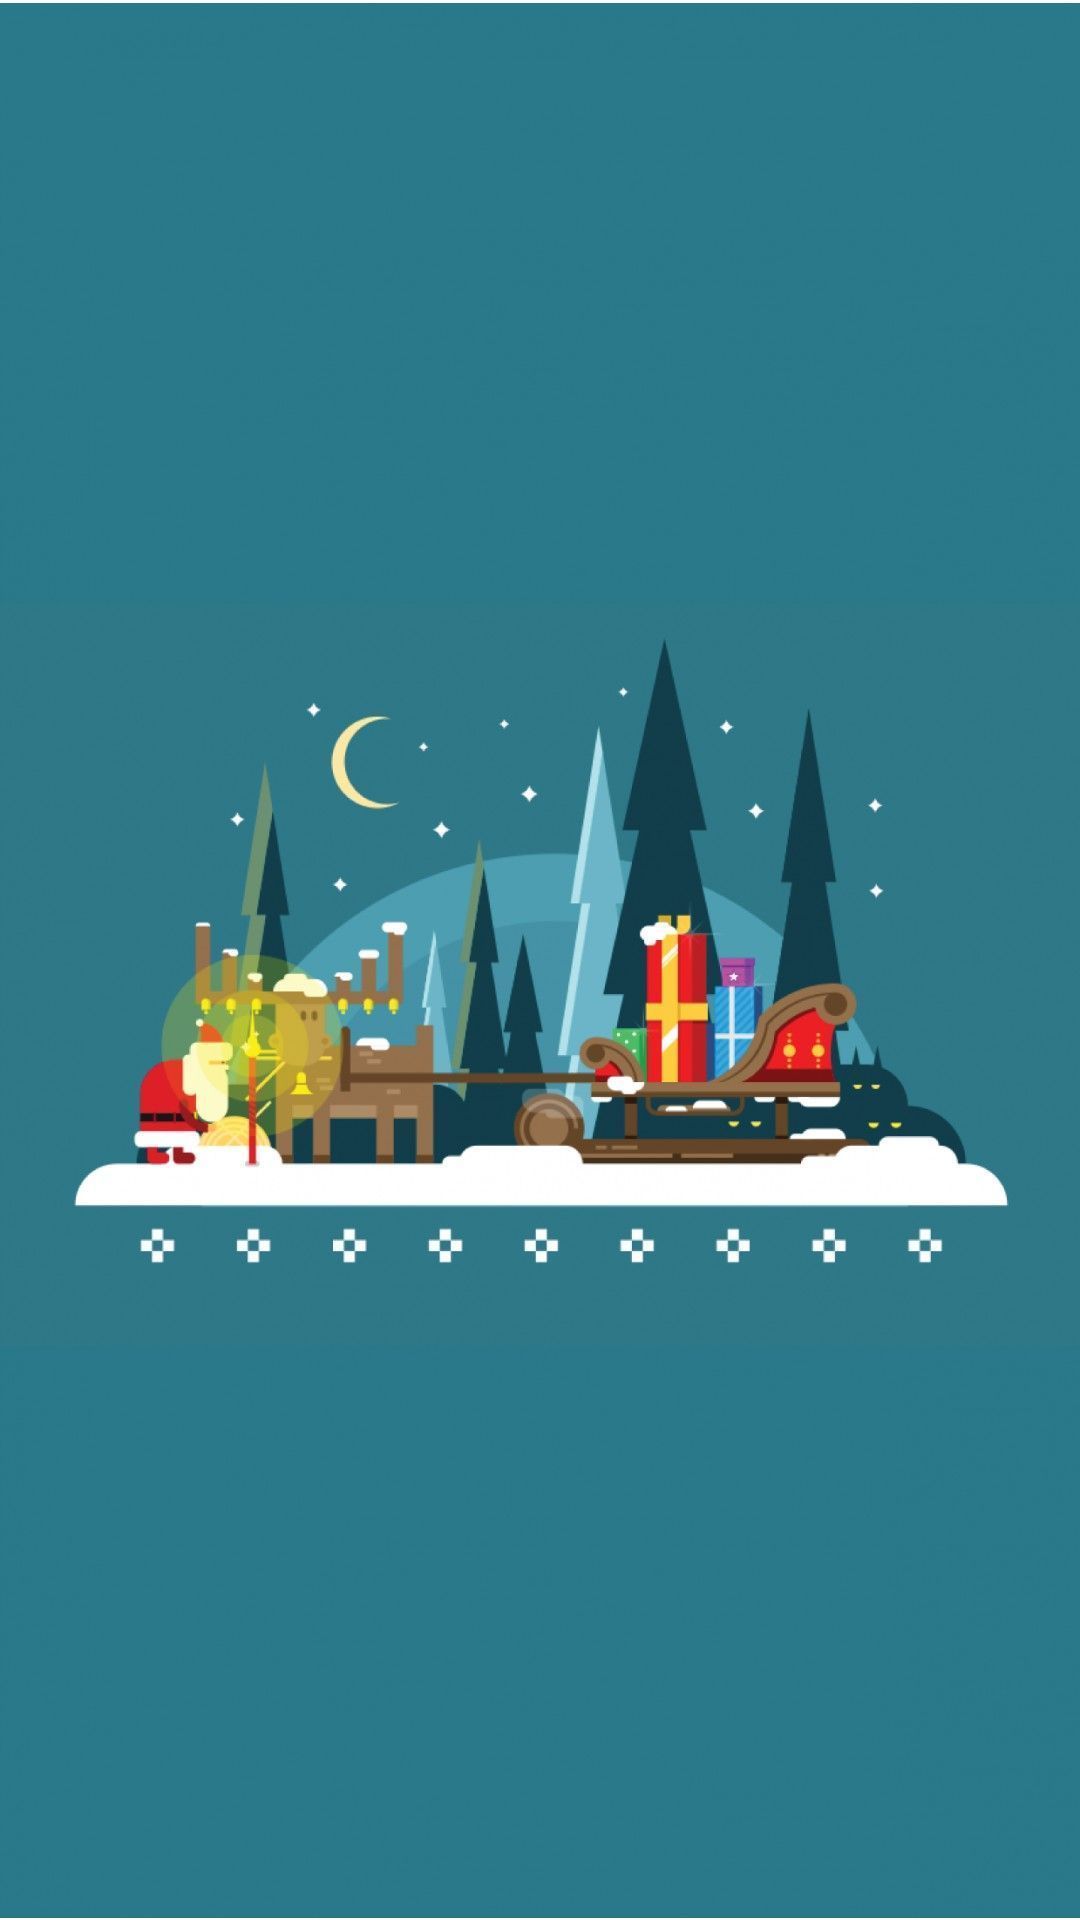 40 Minimalist Christmas Wallpapers for Desktop and iPhone